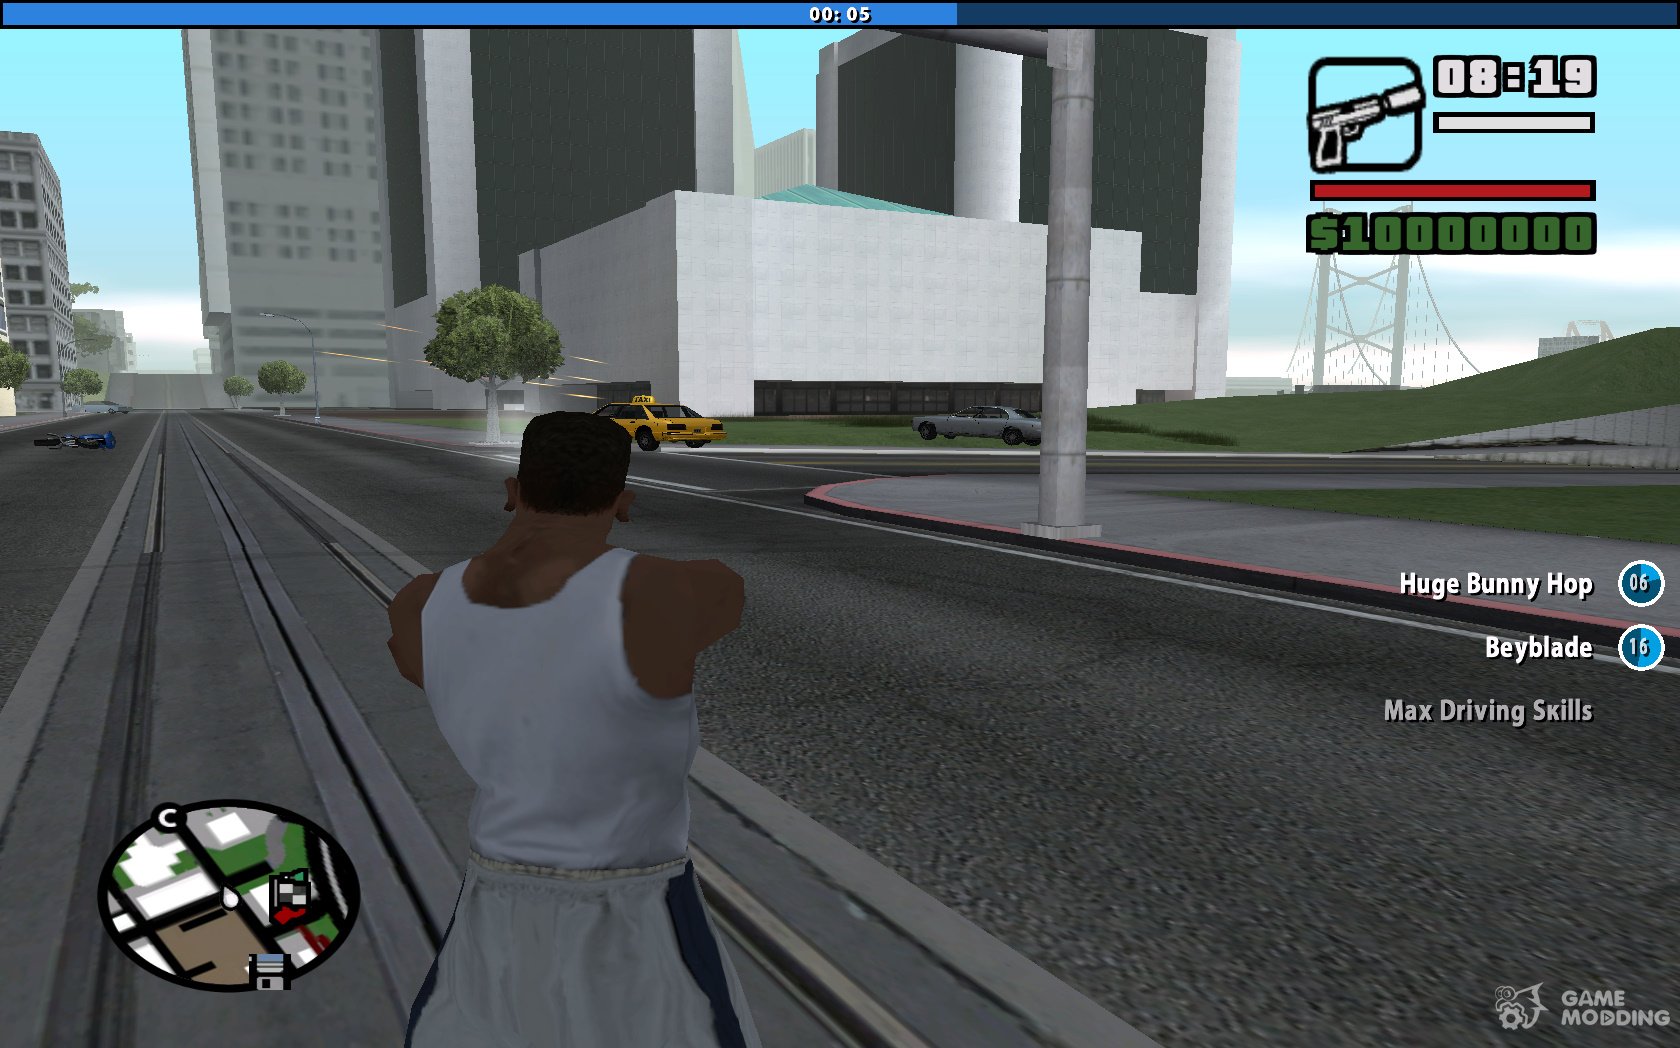 Download Chaos mod - Random activation of cheat codes for GTA San